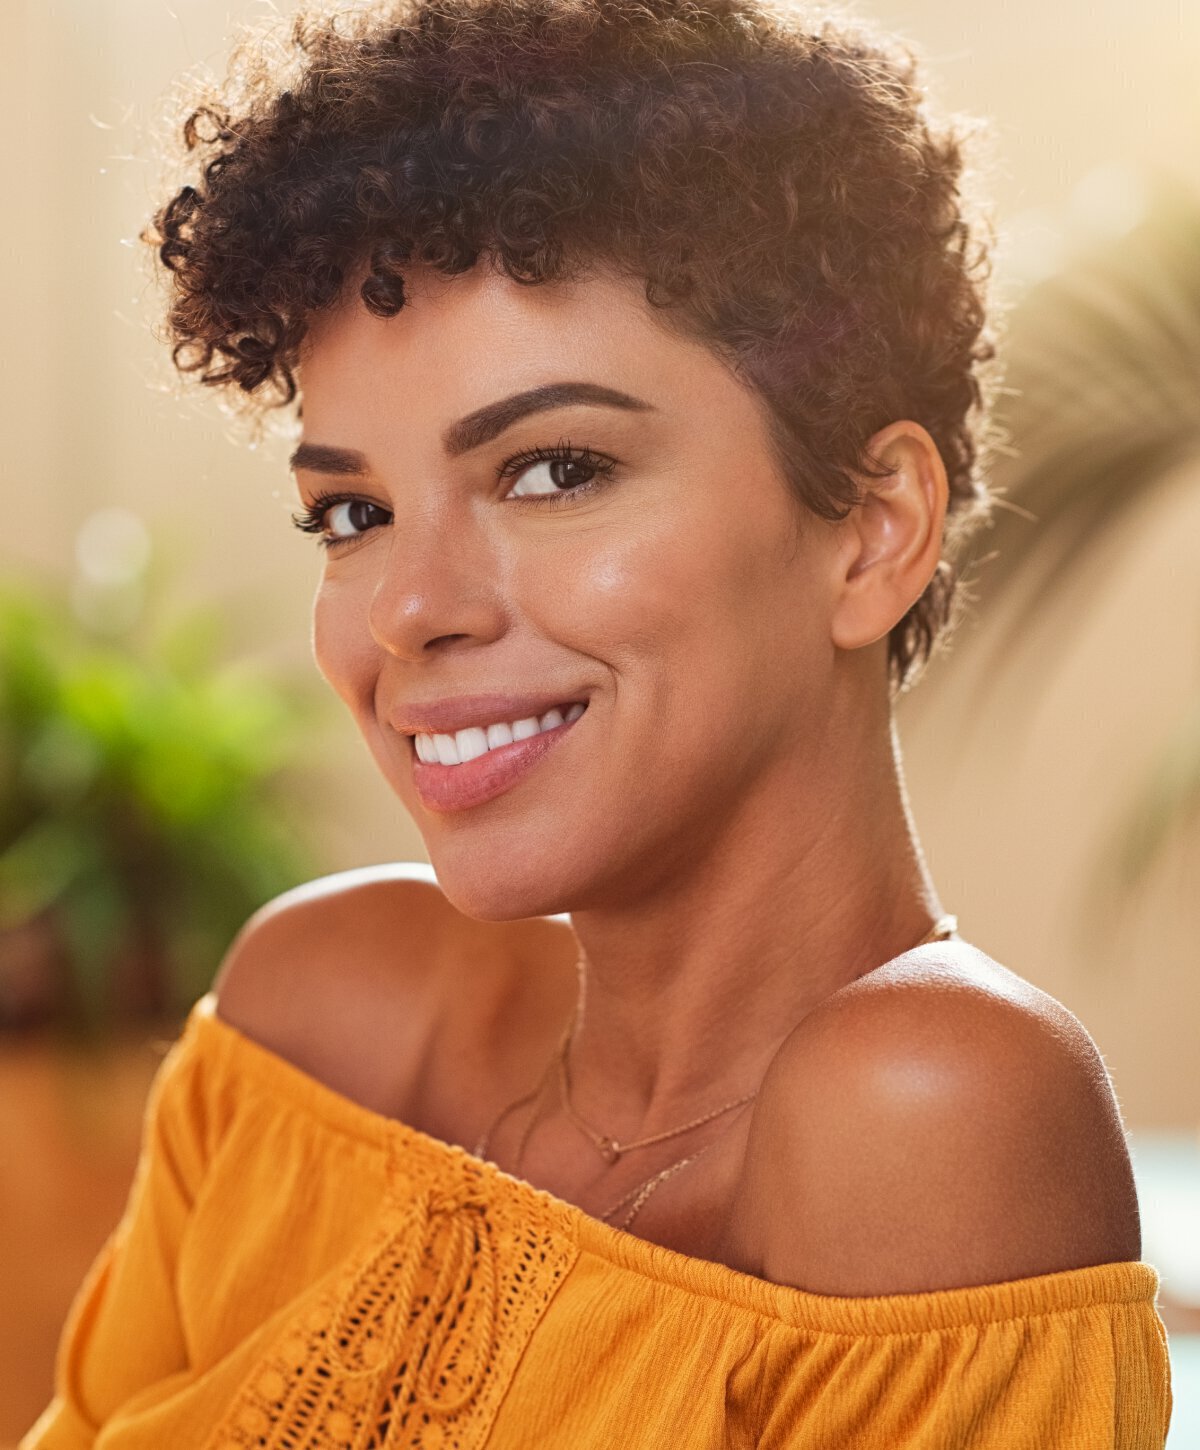 Dark haired woman with orange top smiling